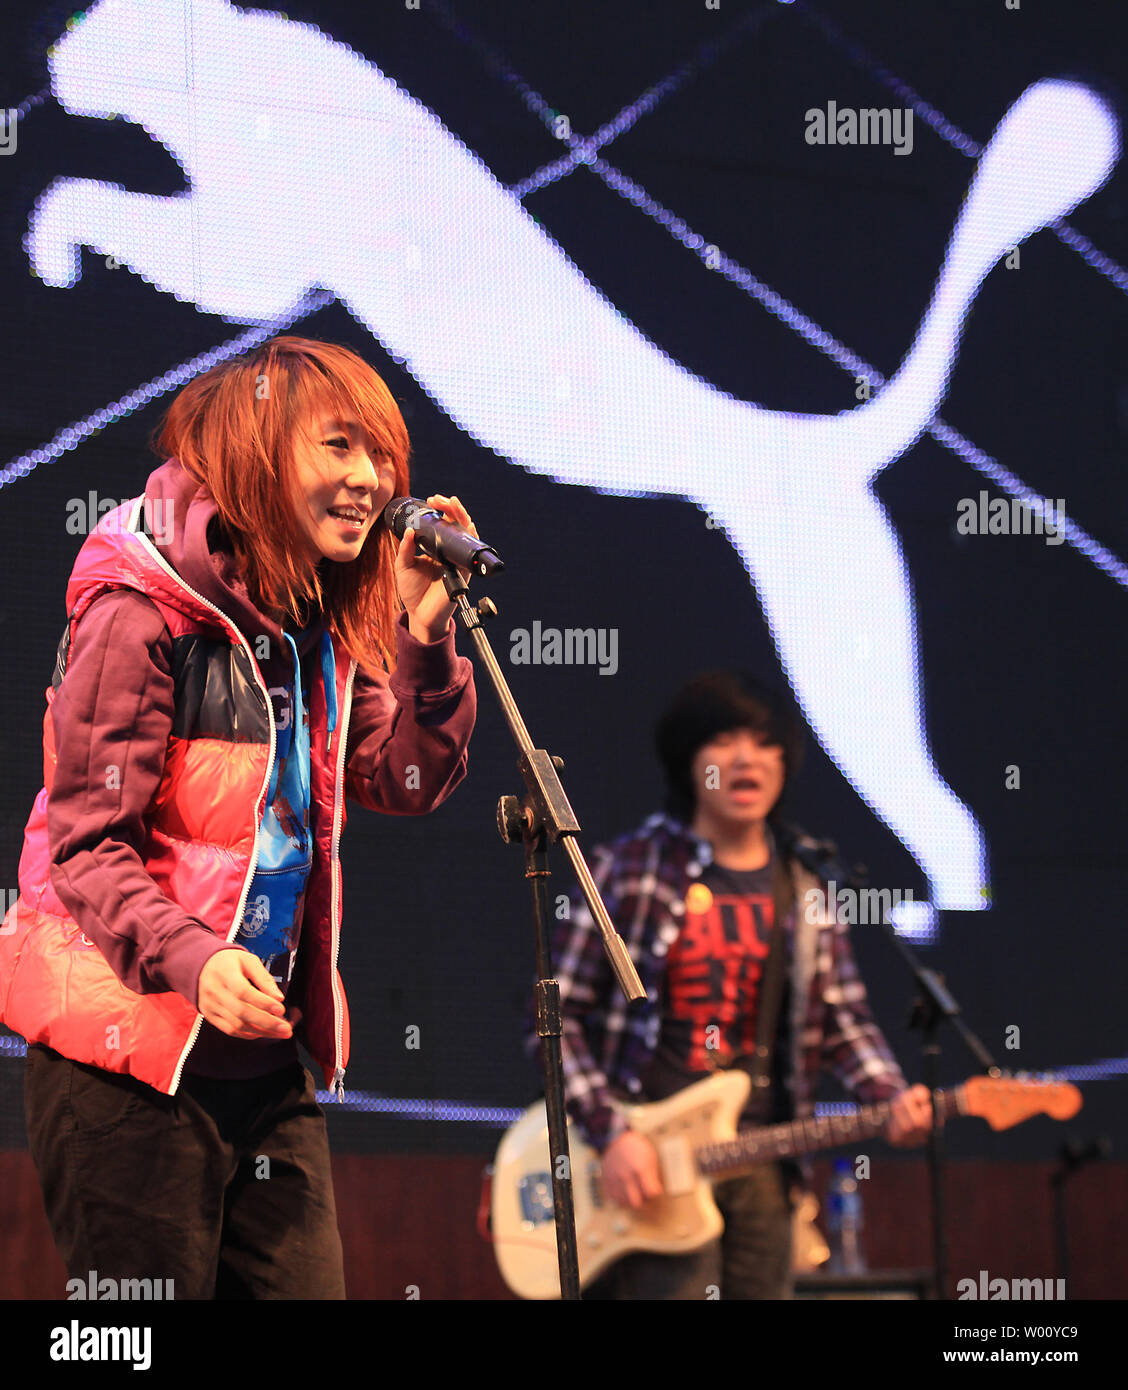 barbilla Adaptación estilo A Chinese rock band hired by Puma, a leading sports lifestyle company,  plays American music covers during a public marketing event at an  international fashion mall in Beijing November 5, 2011. Foreign